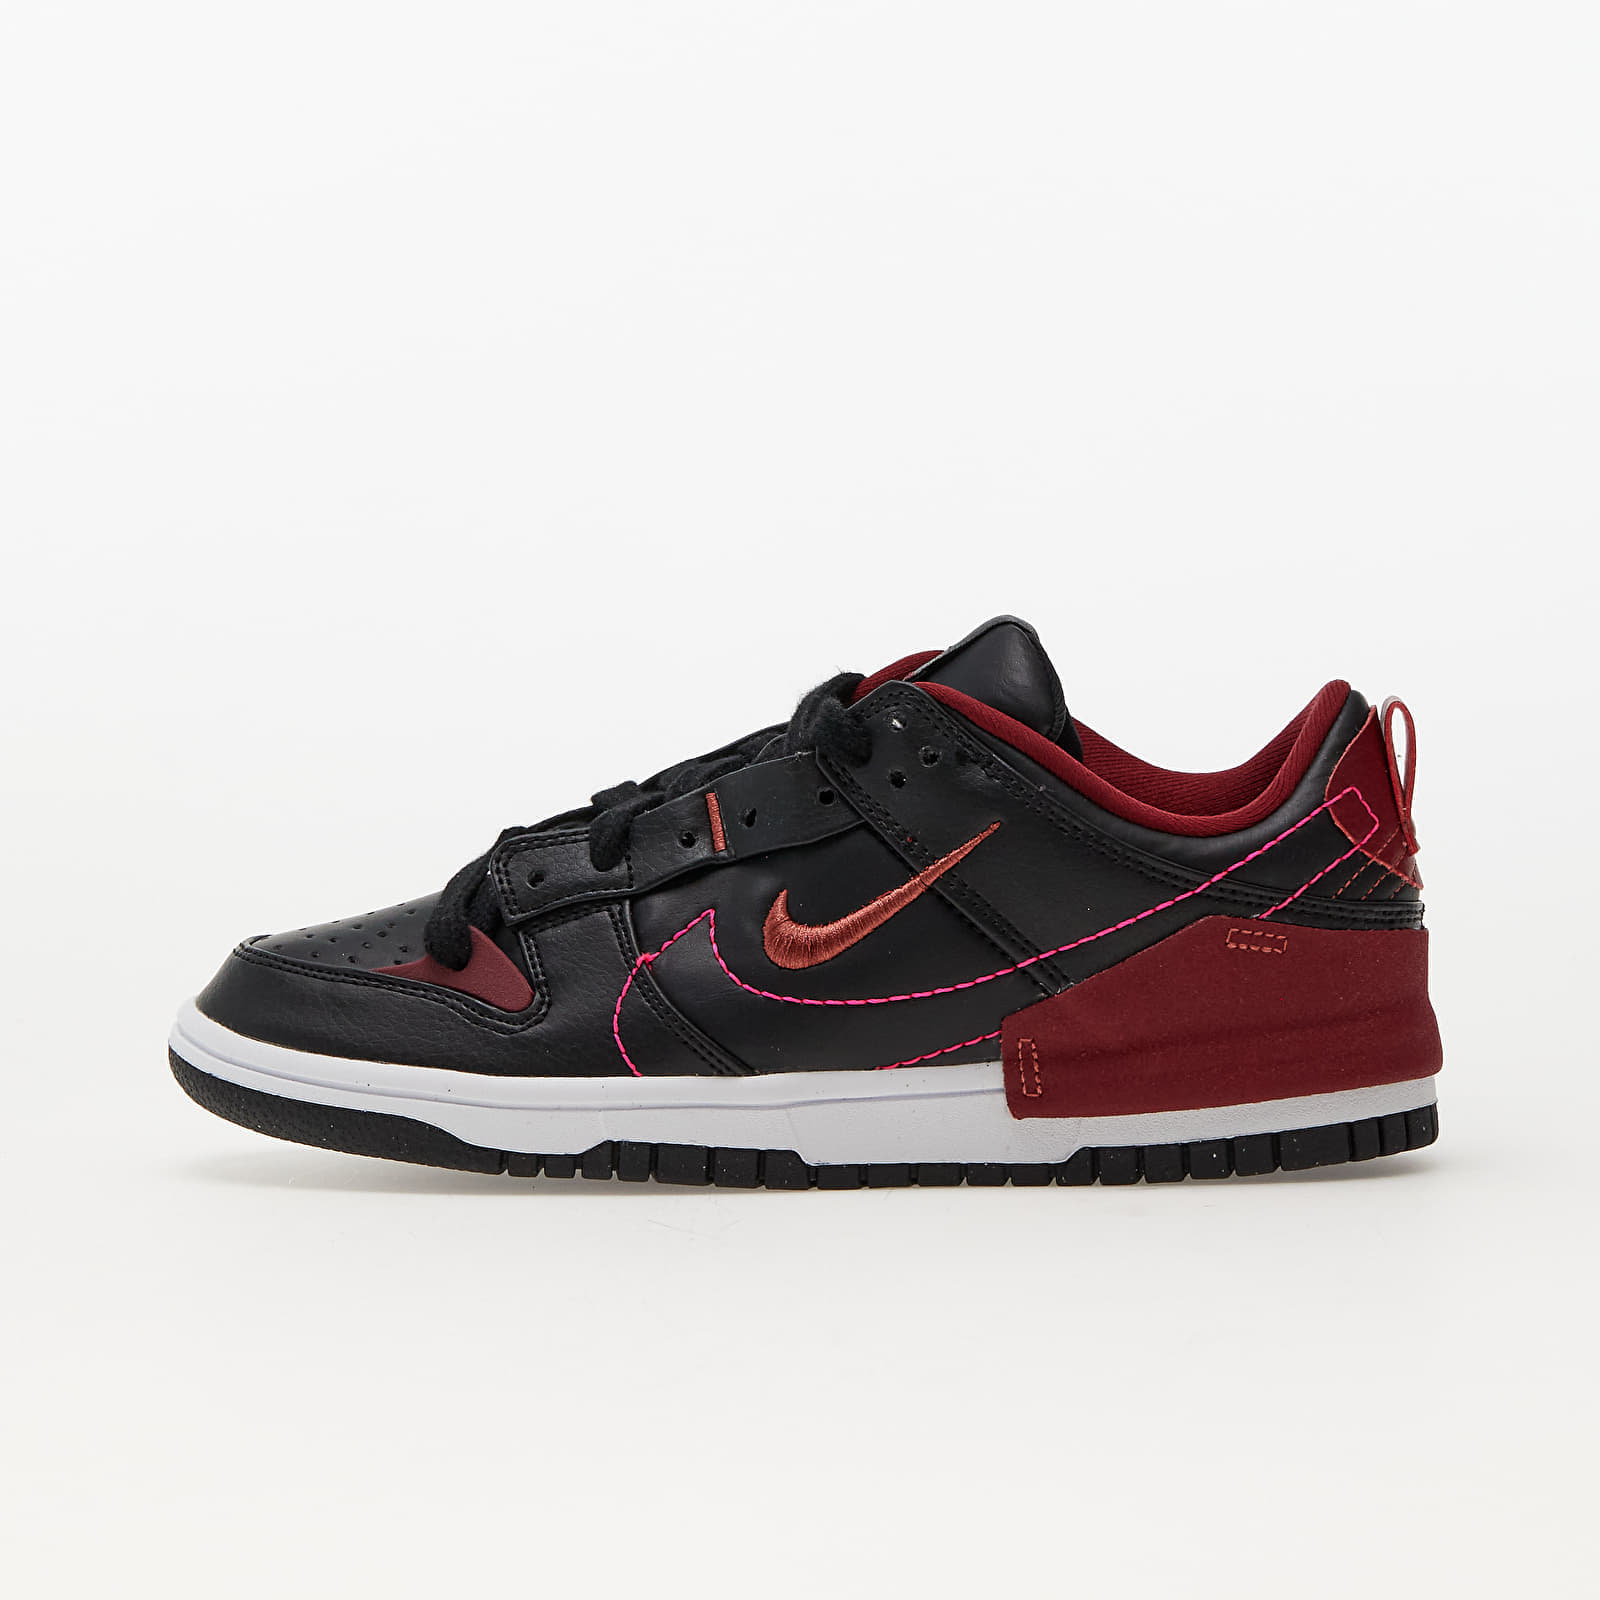 Women's shoes Nike W Dunk Low Disrupt 2 Black/ Canyon Rust-Team Red-Hyper Pink